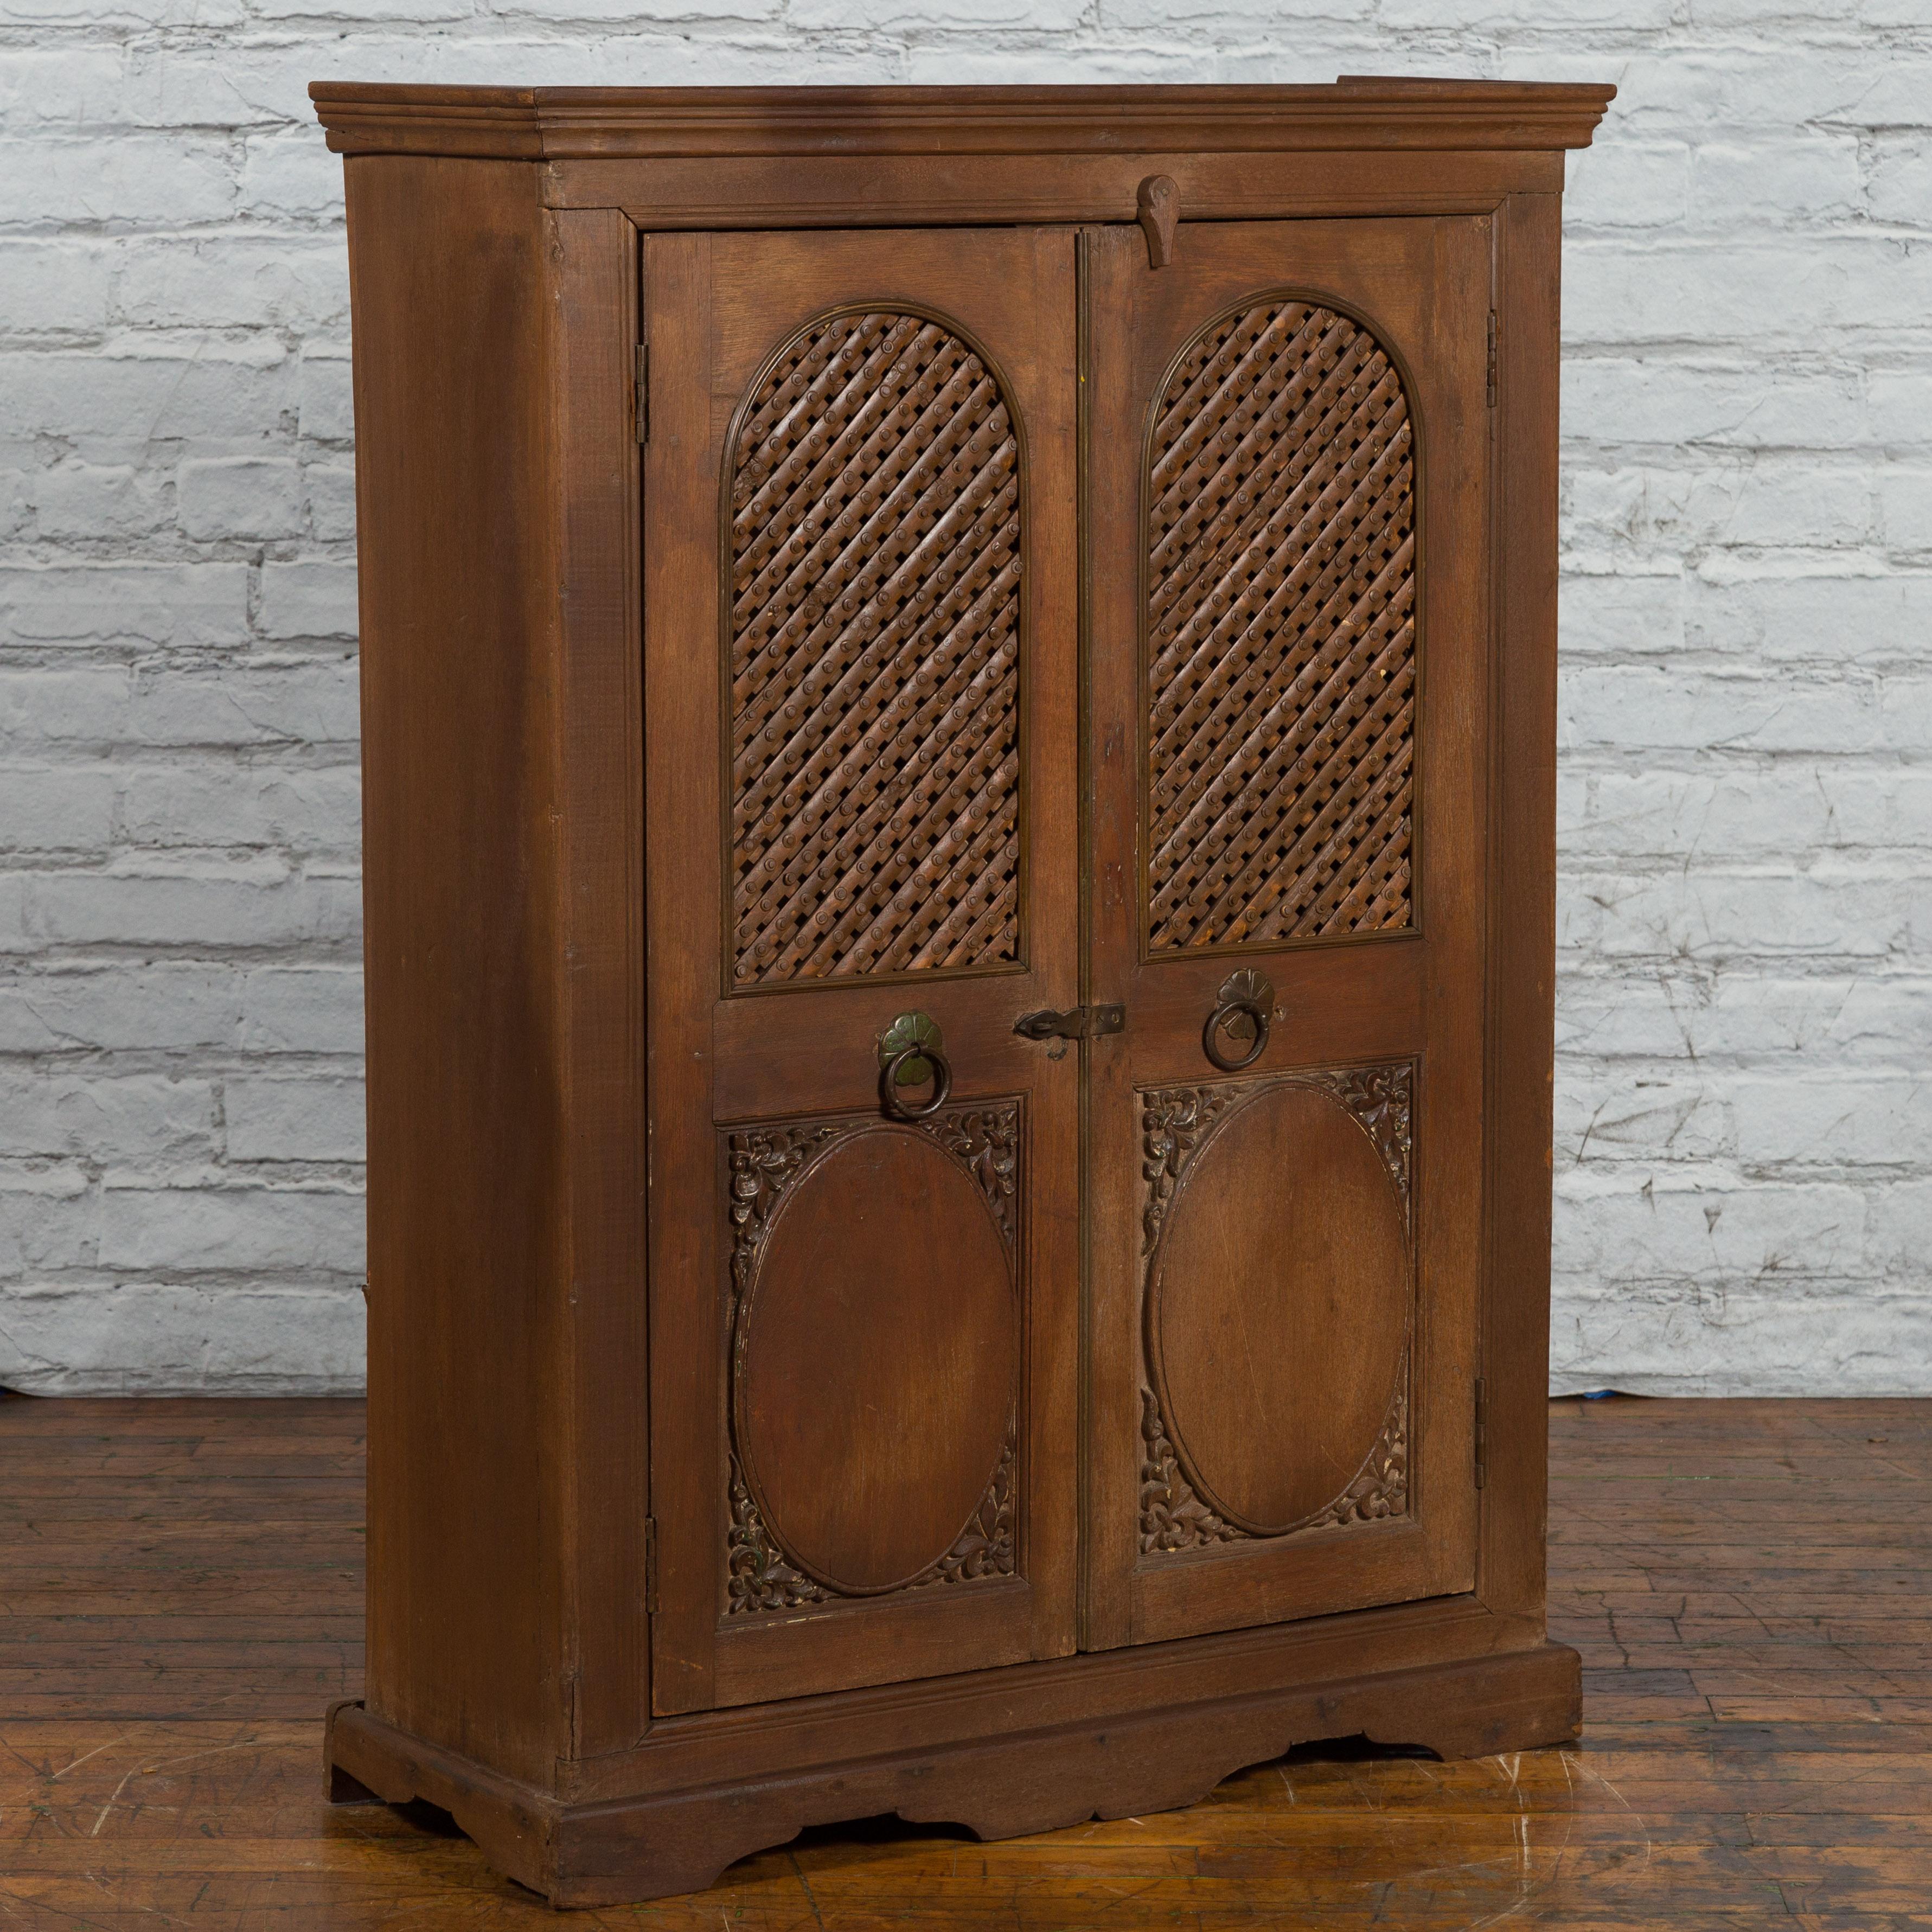 An Indian wooden cabinet from the mid 20th century, with lattice motifs and carved panels. Created in India during the midcentury period, this wooden cabinet features a molded cornice sitting above two doors adorned with arching panels and lattice